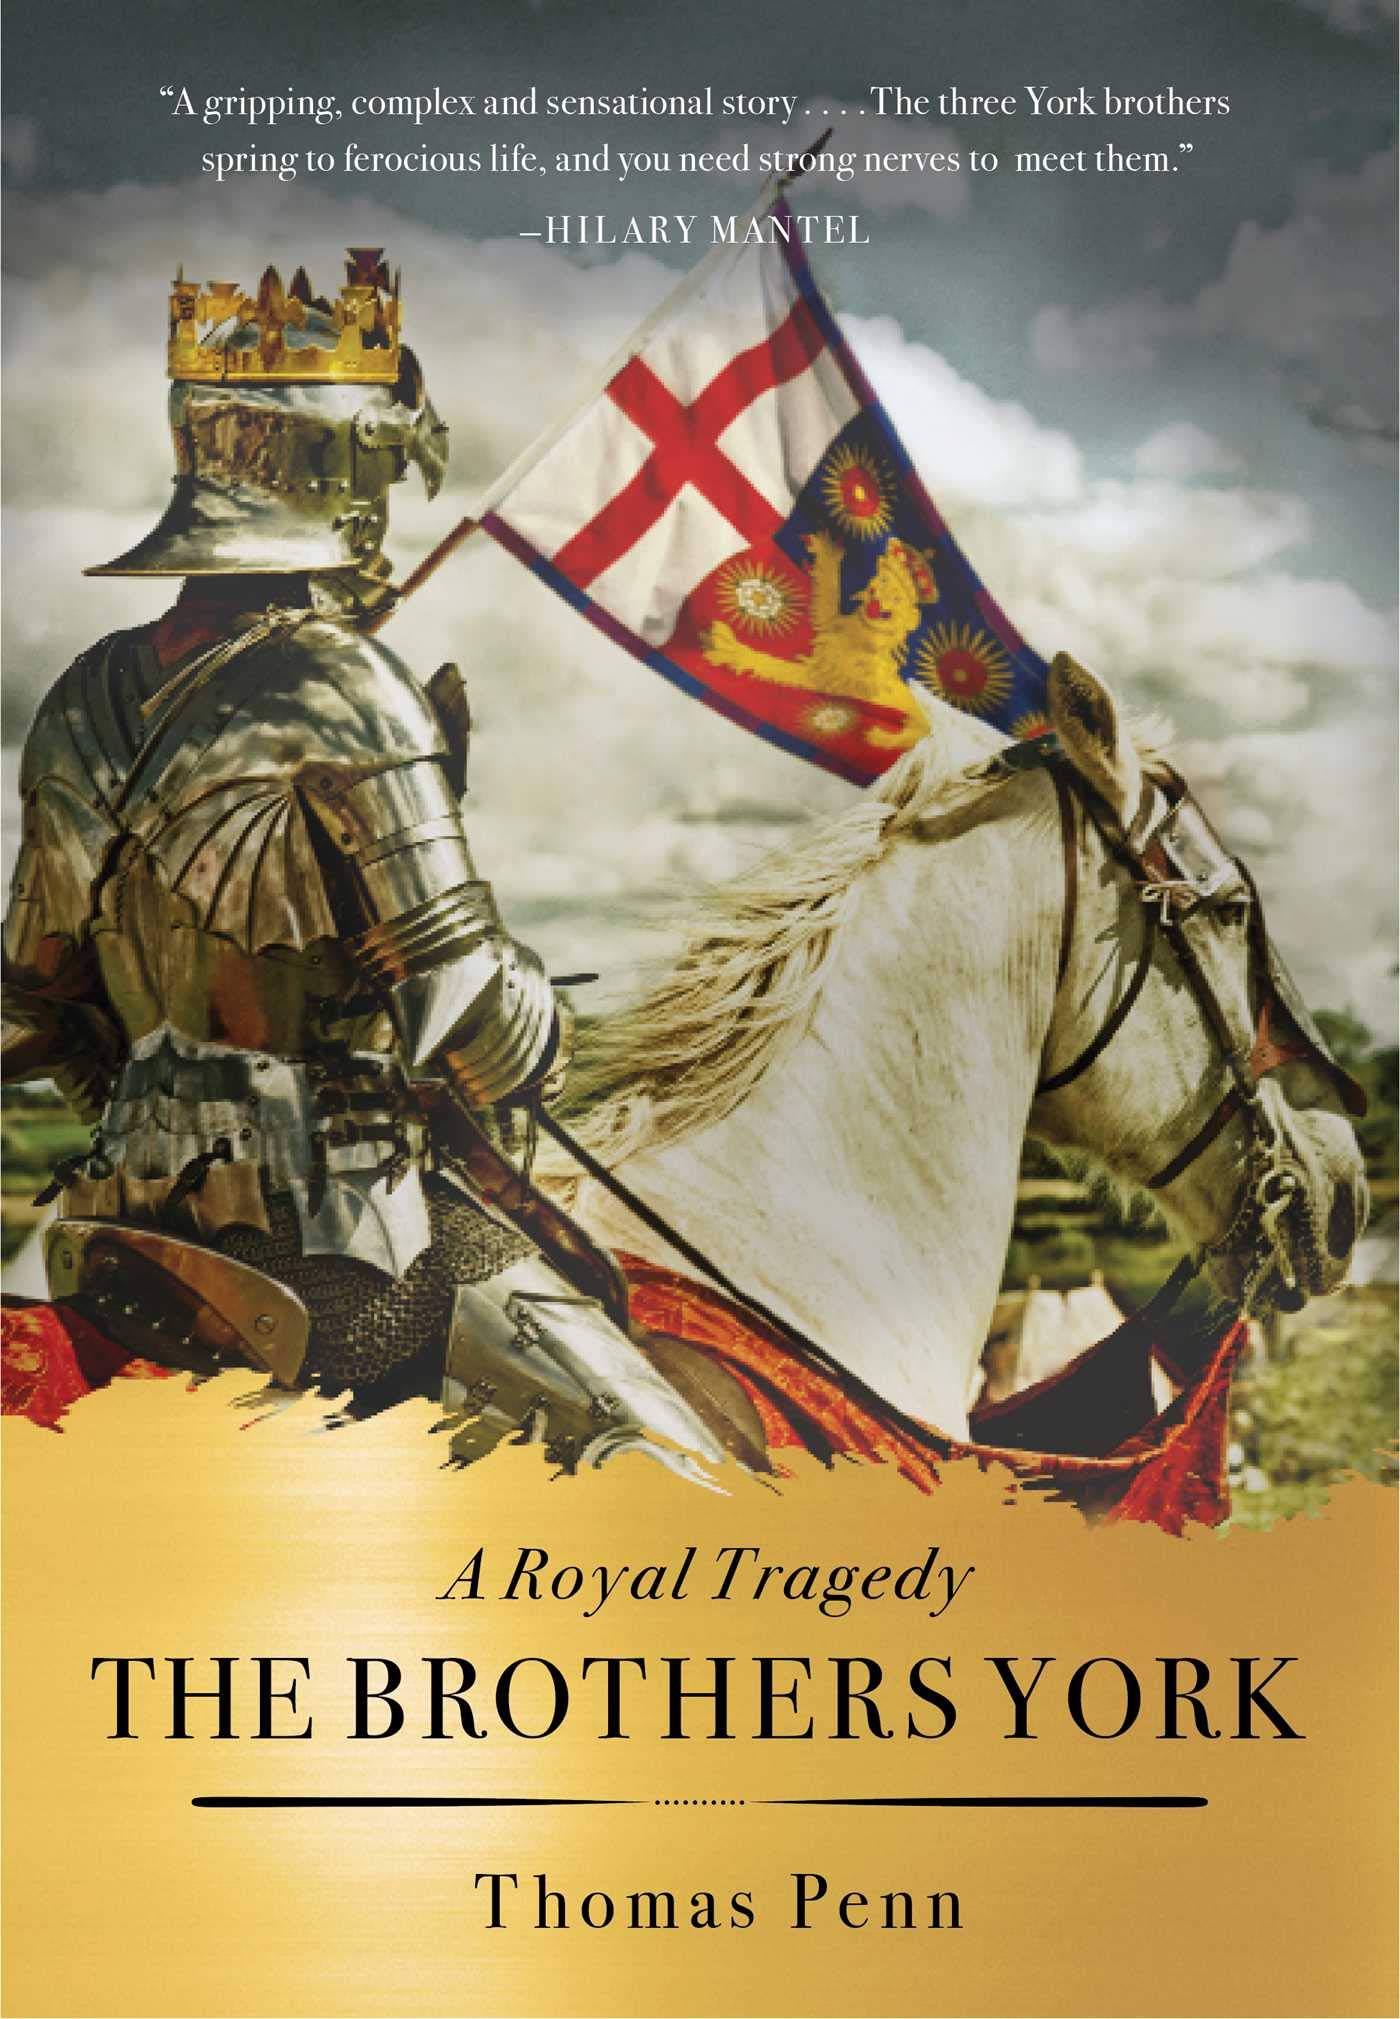 The Brothers York: A Royal Tragedy